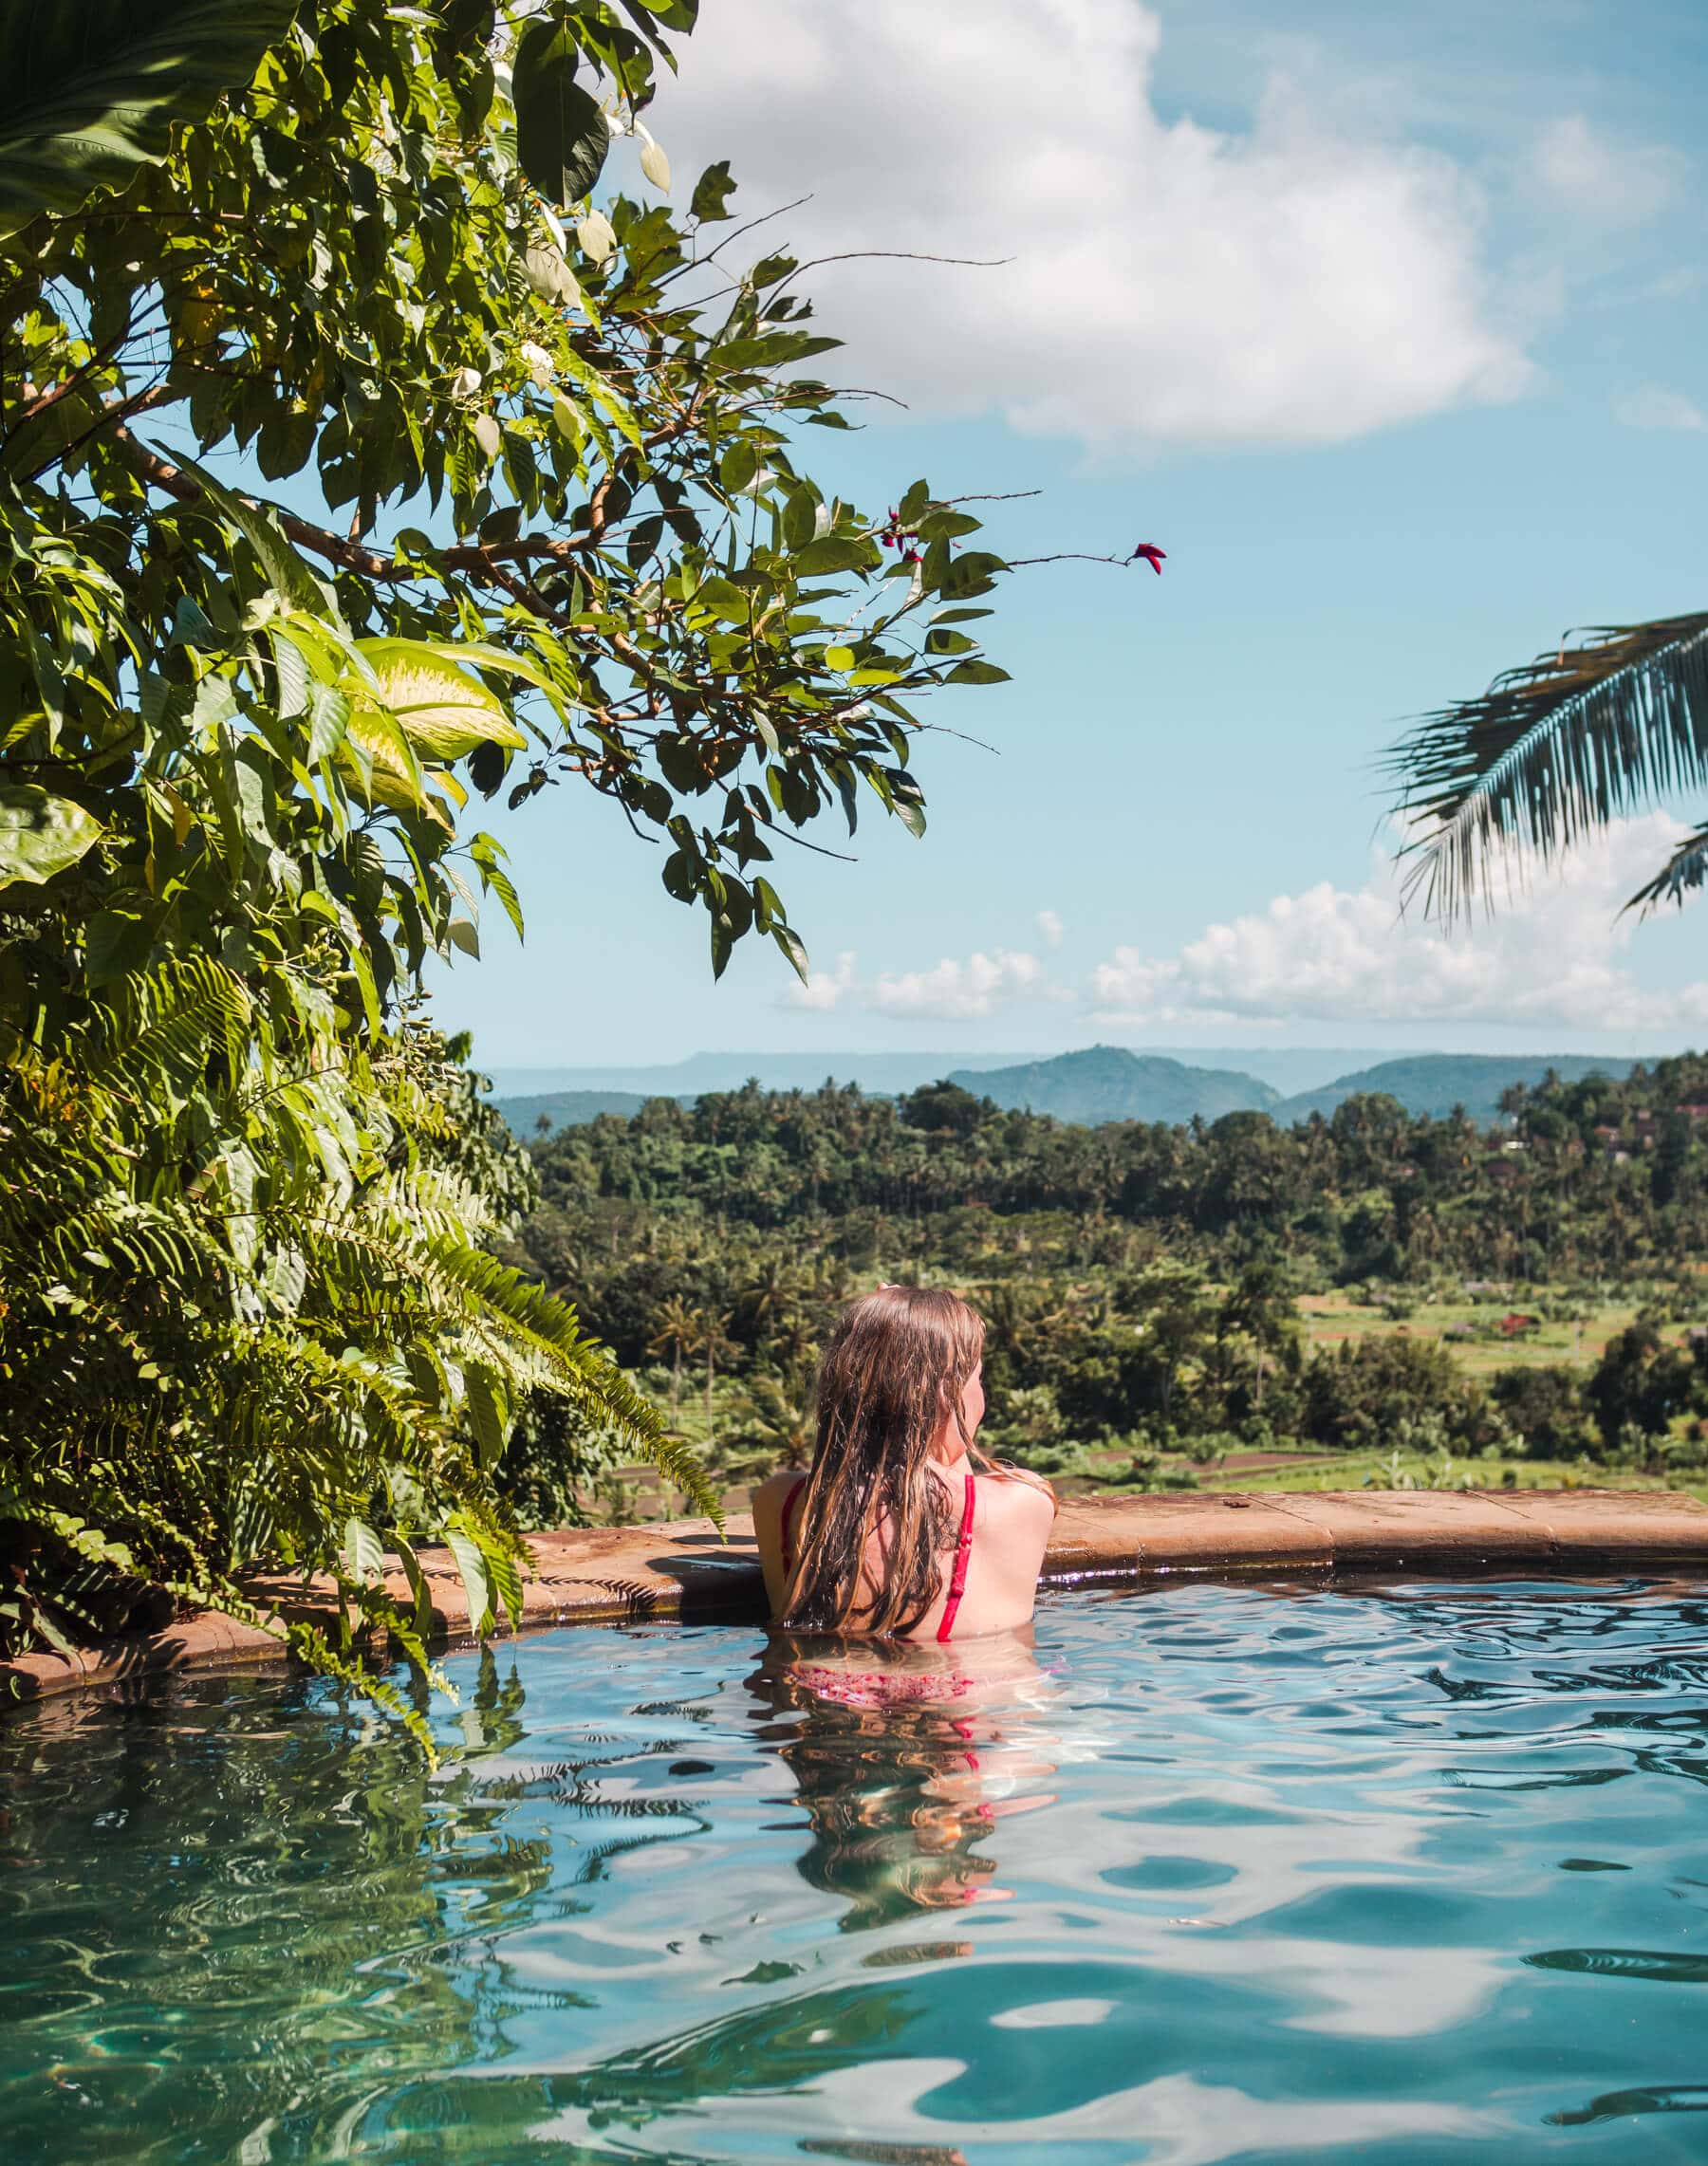 Girl with long hear wearing a red bikini lokking over the edge at the pool at Kubu Carik Bungalows, over the lush jungle and rice fields.